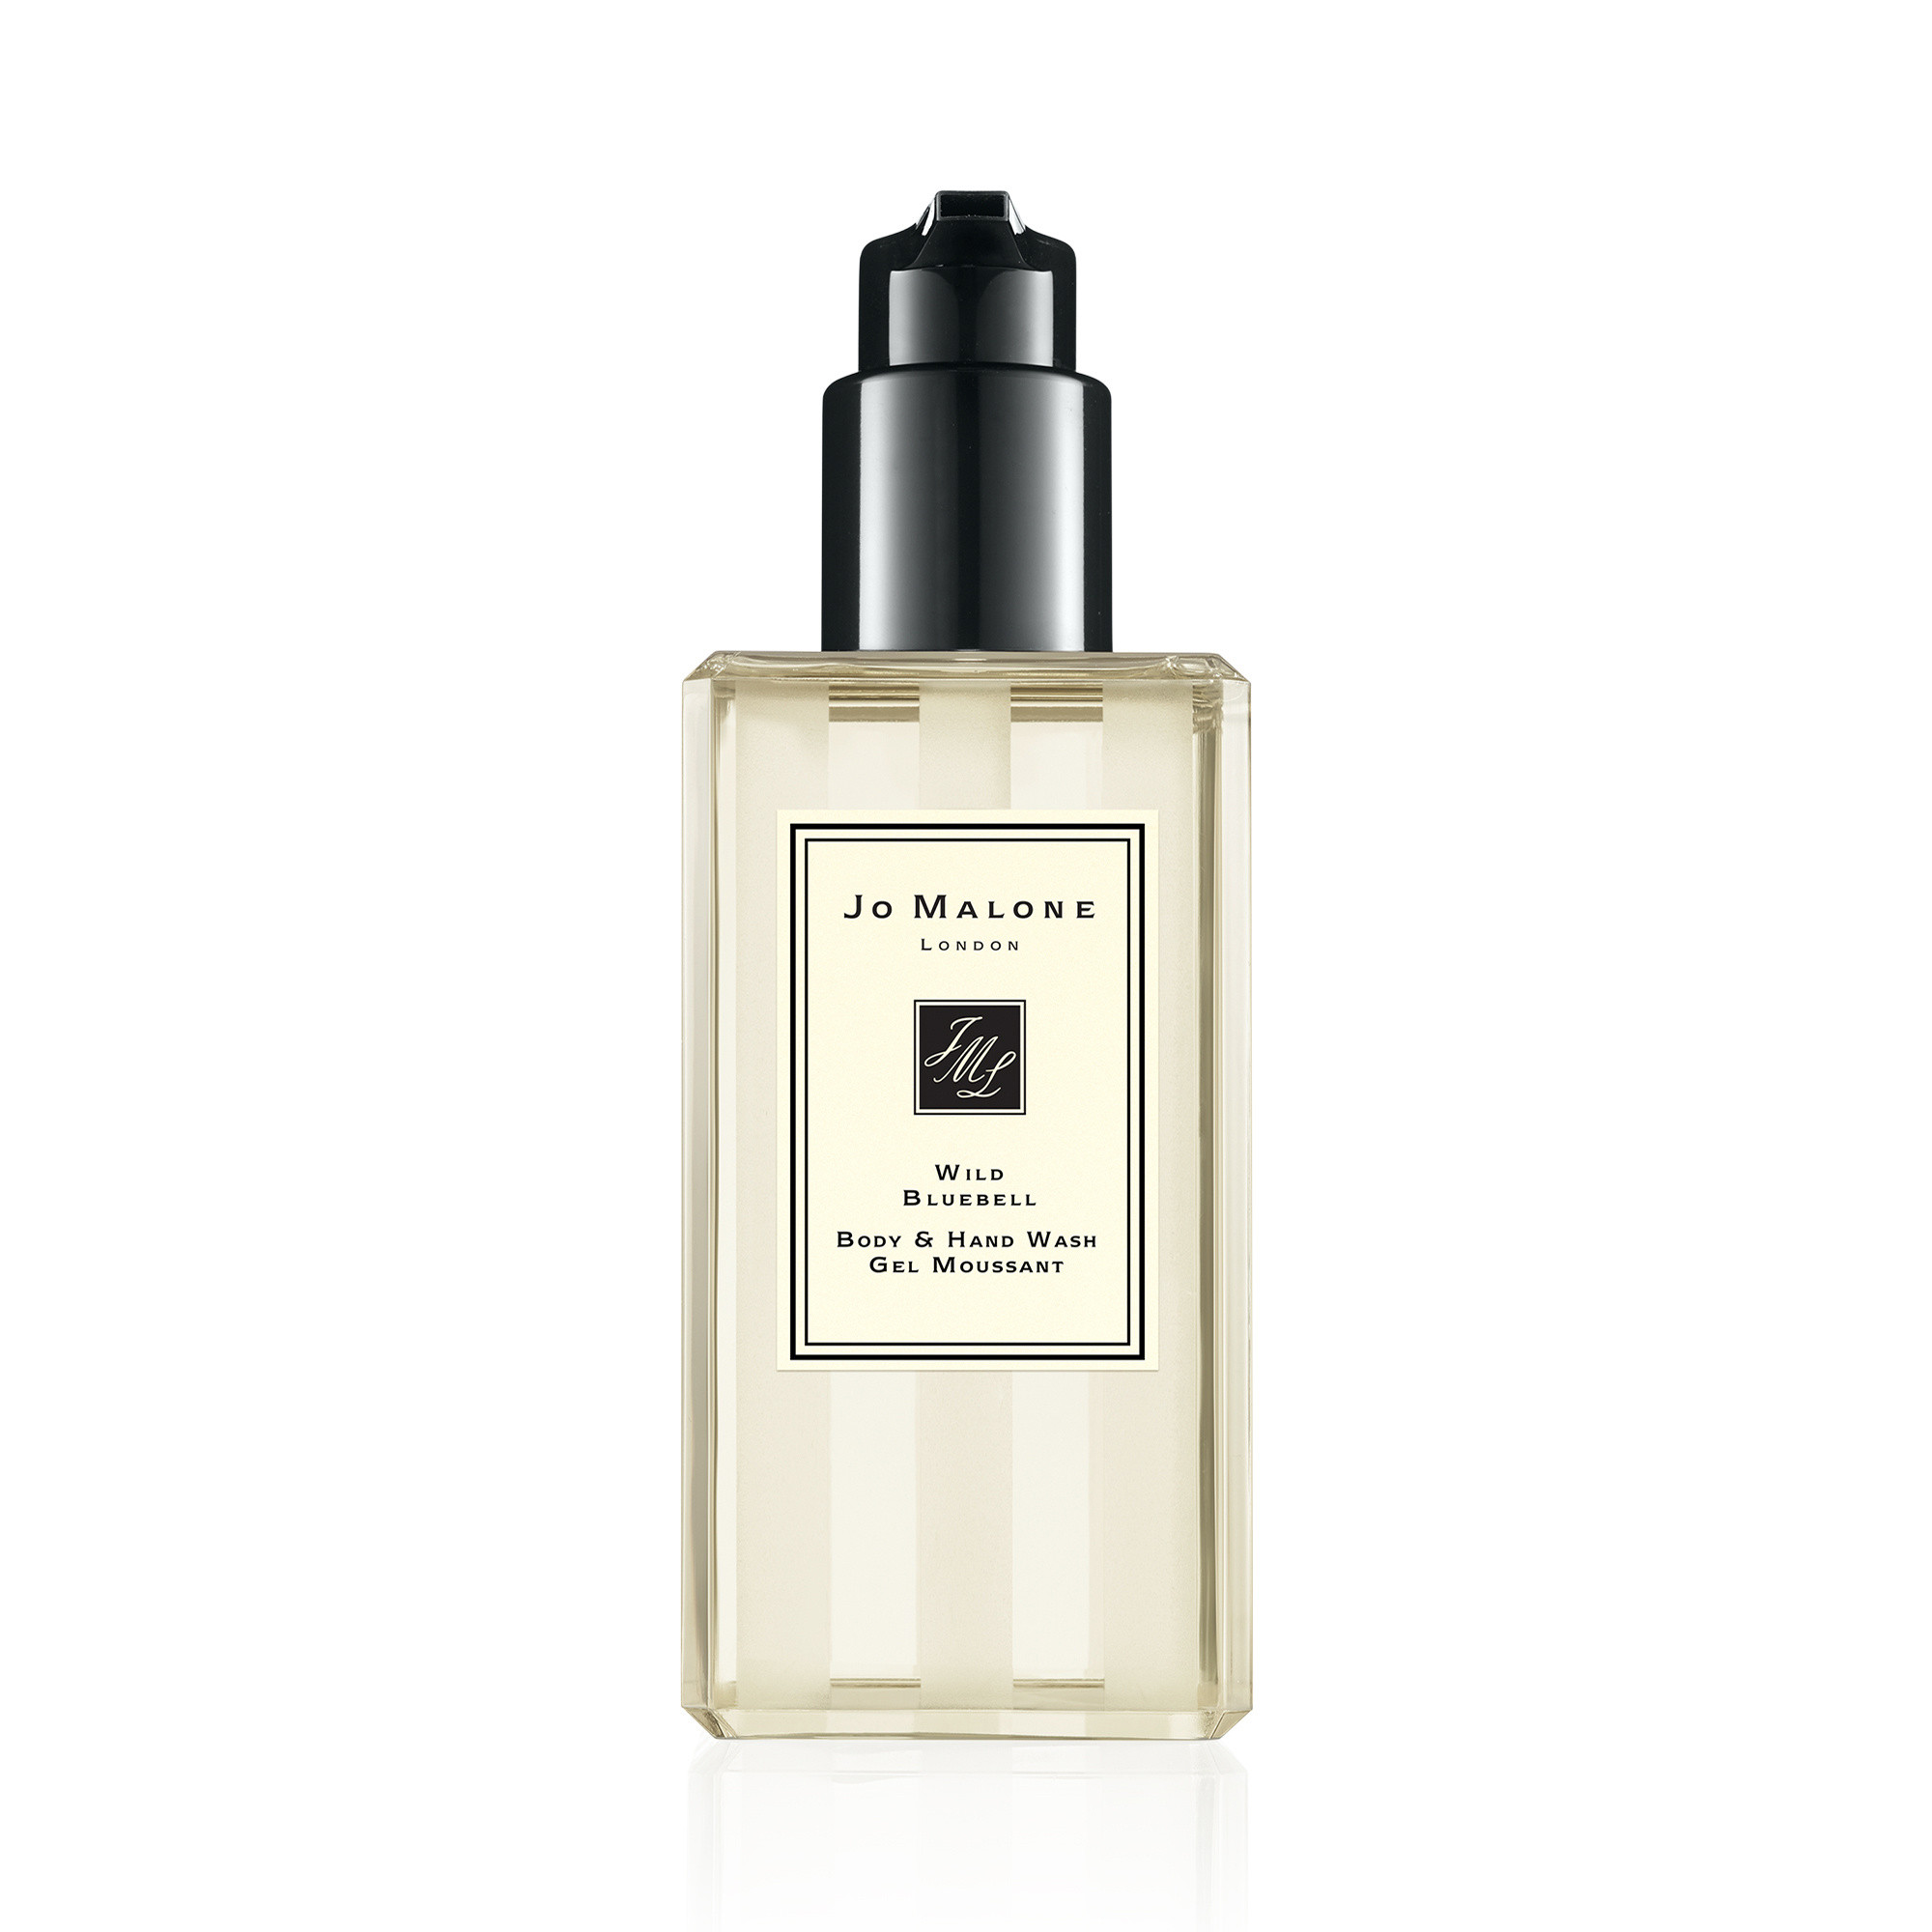 Jo Malone London wild bluebell body & hand wash 250 ml, Beige, large image number 0